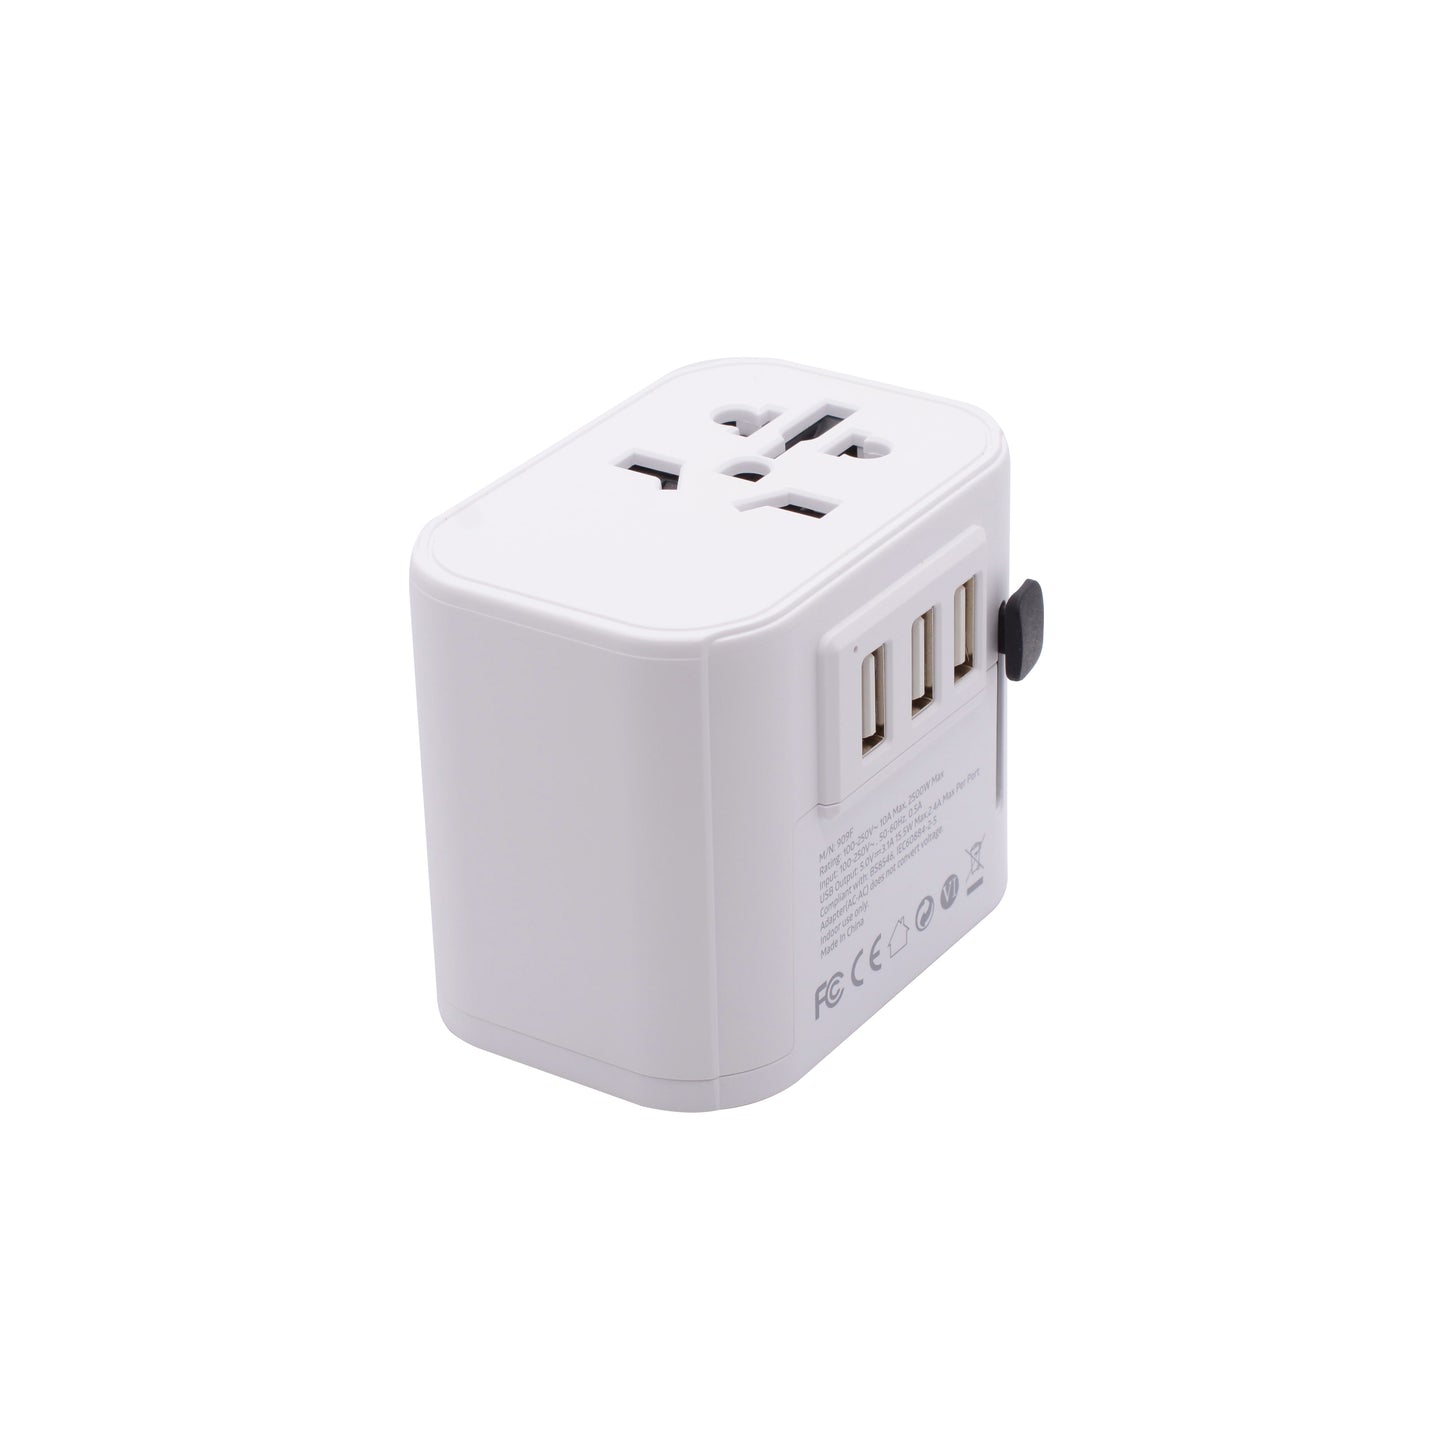 World Travel Adapter & USB Charger <br> Series 3